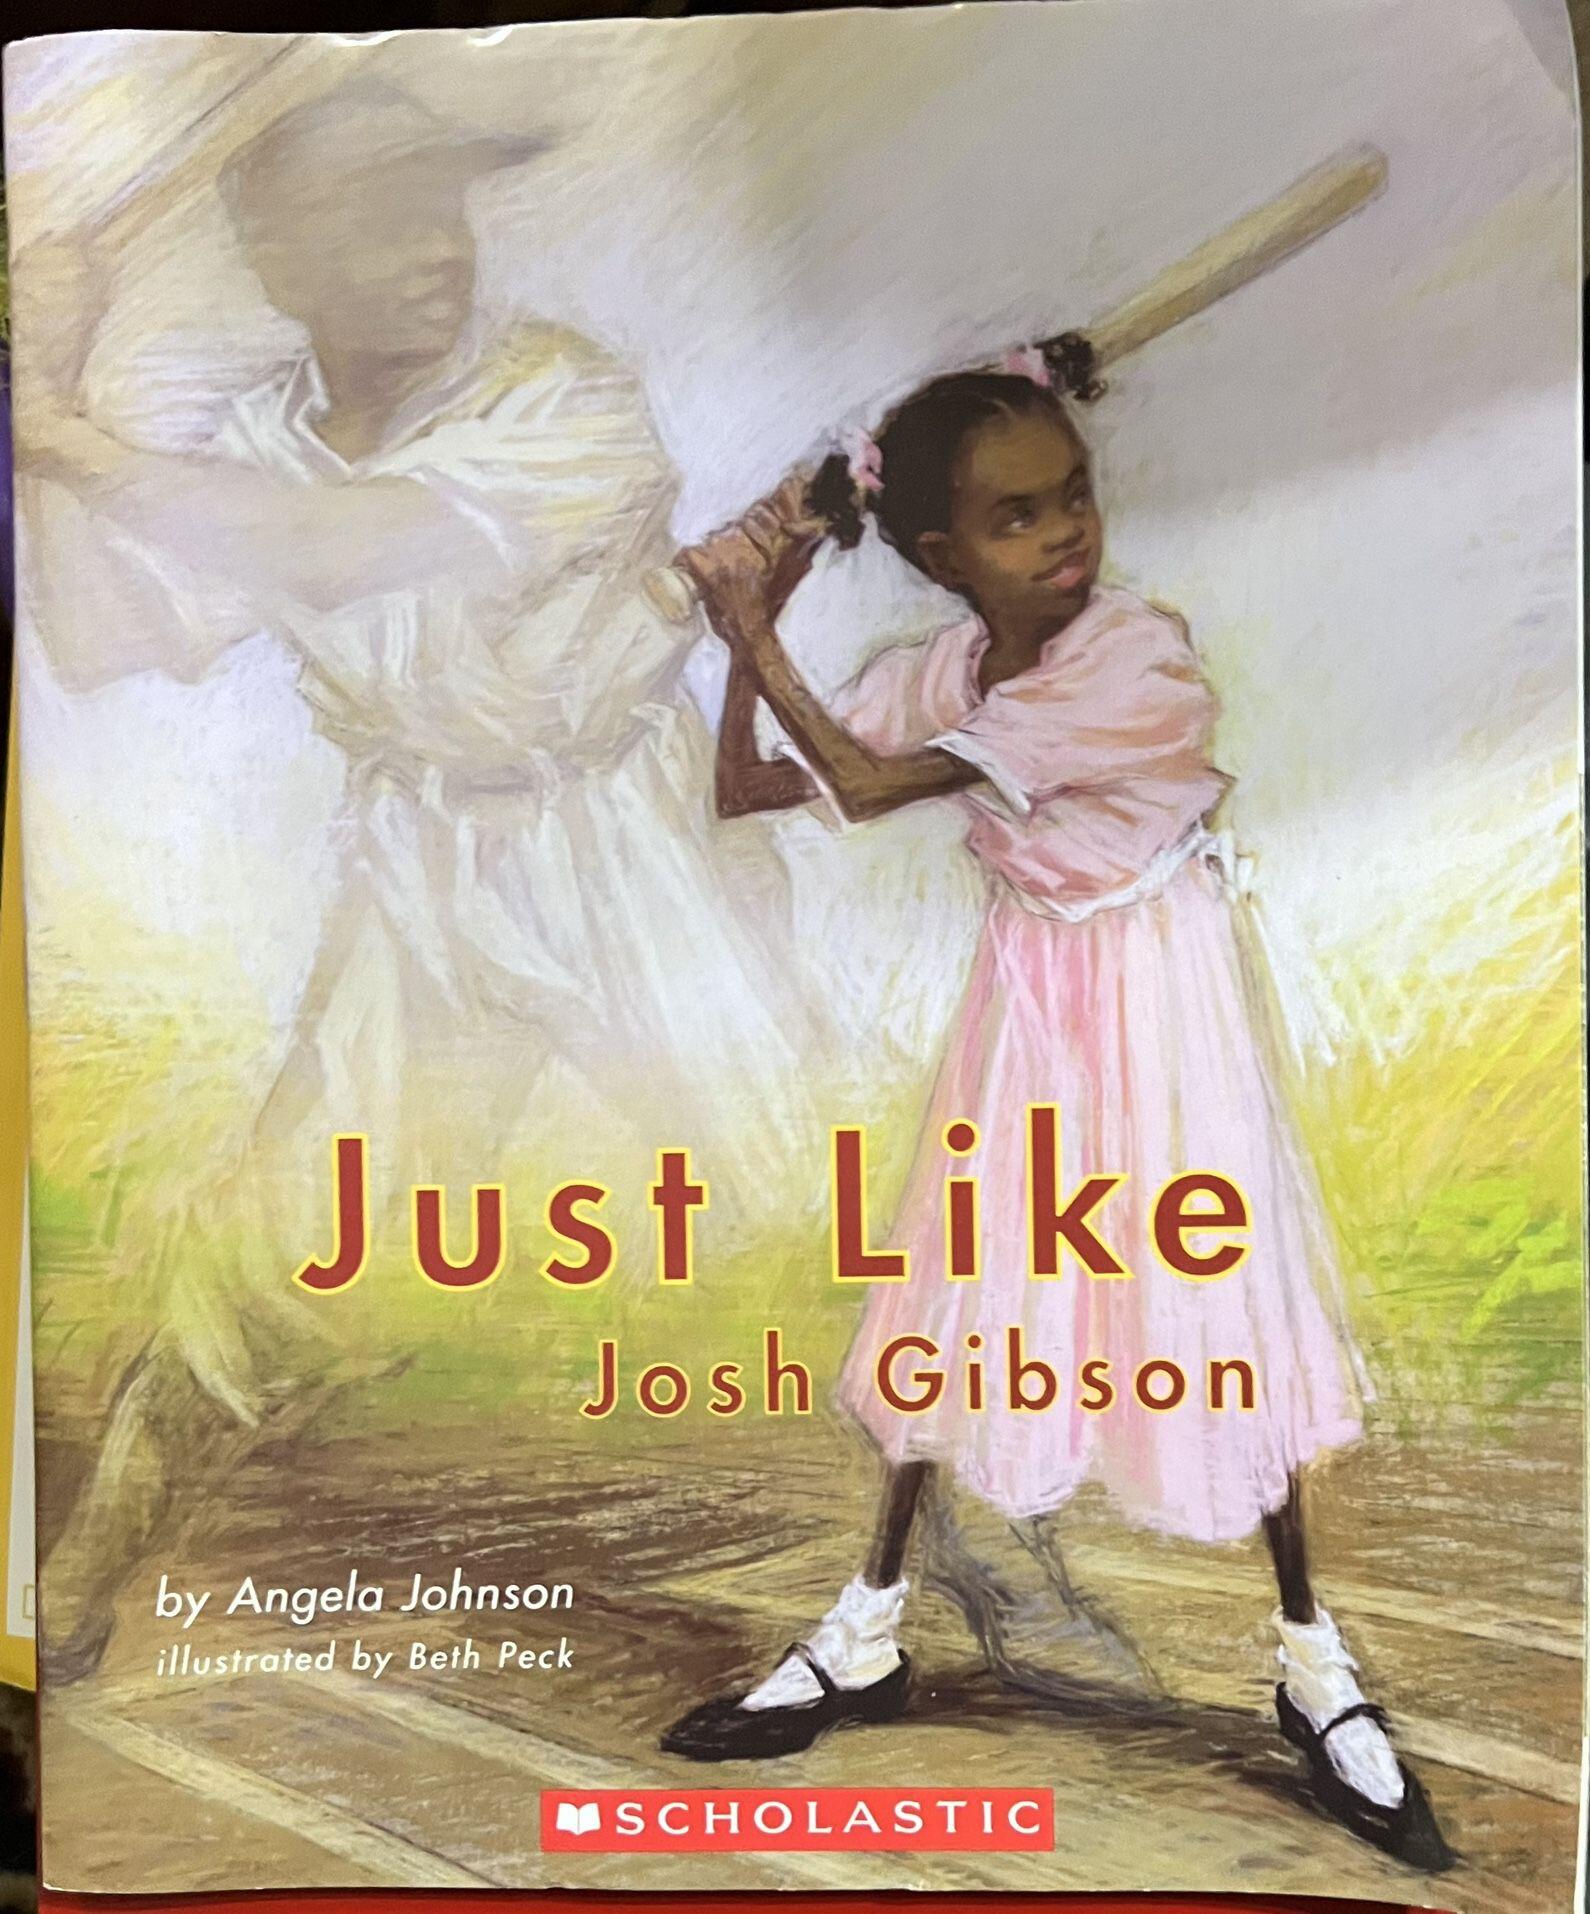 Just　In　TX　For　Like　Sachse,　—　Josh　Gibson　$15　Free　For　Sale　Nextdoor